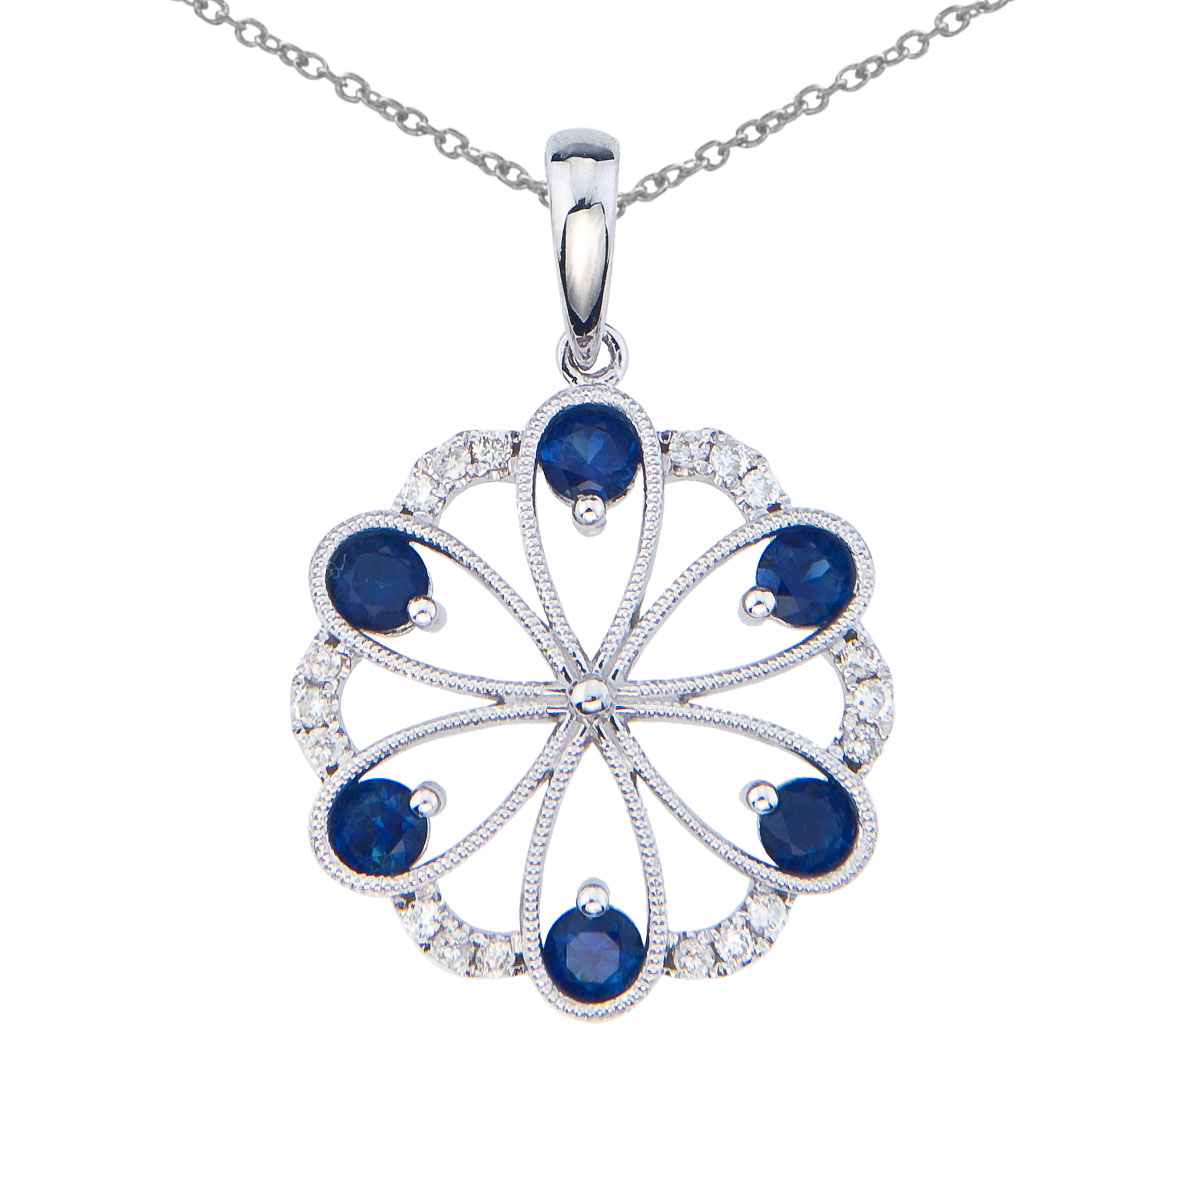 Beautiful floral pendant set in 14k white gold with 6 dazzling sapphires and .14 total carats of ...